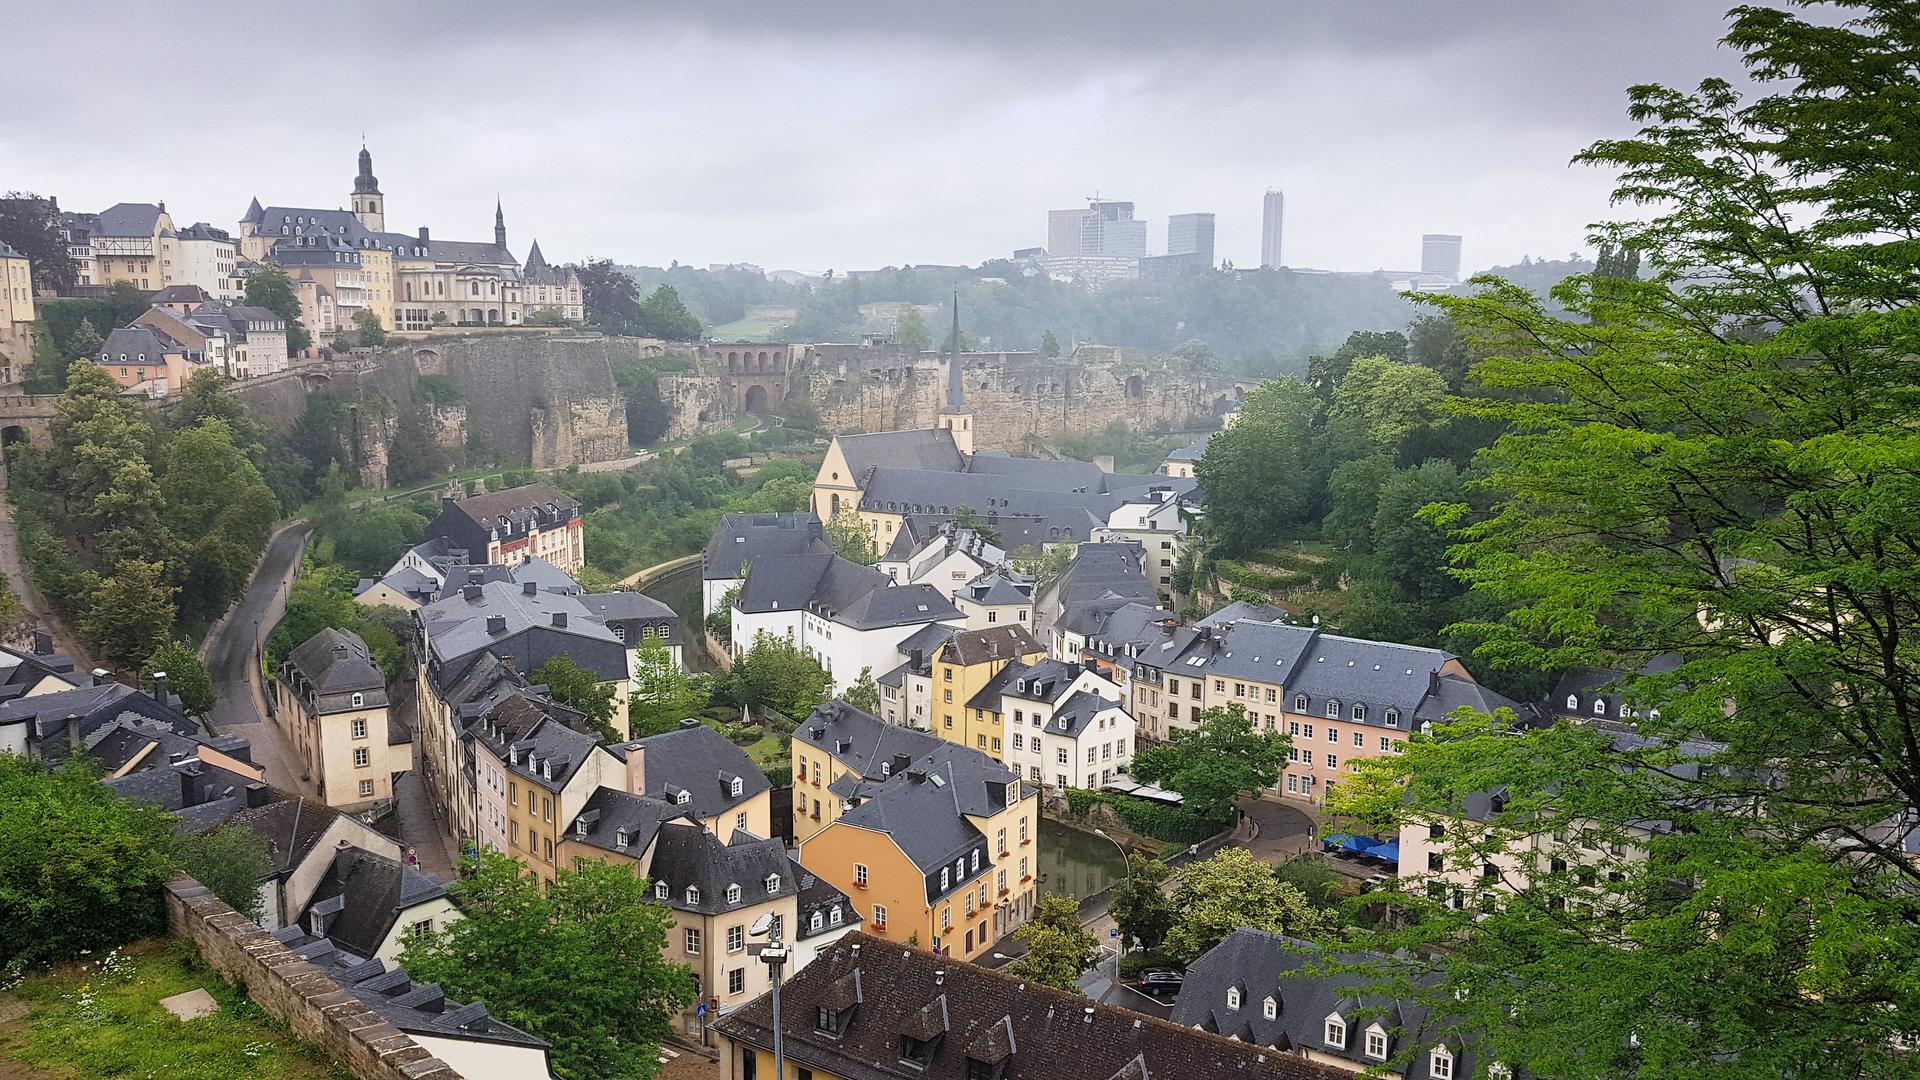 Fifty shades of grey sky this summer in Luxembourg